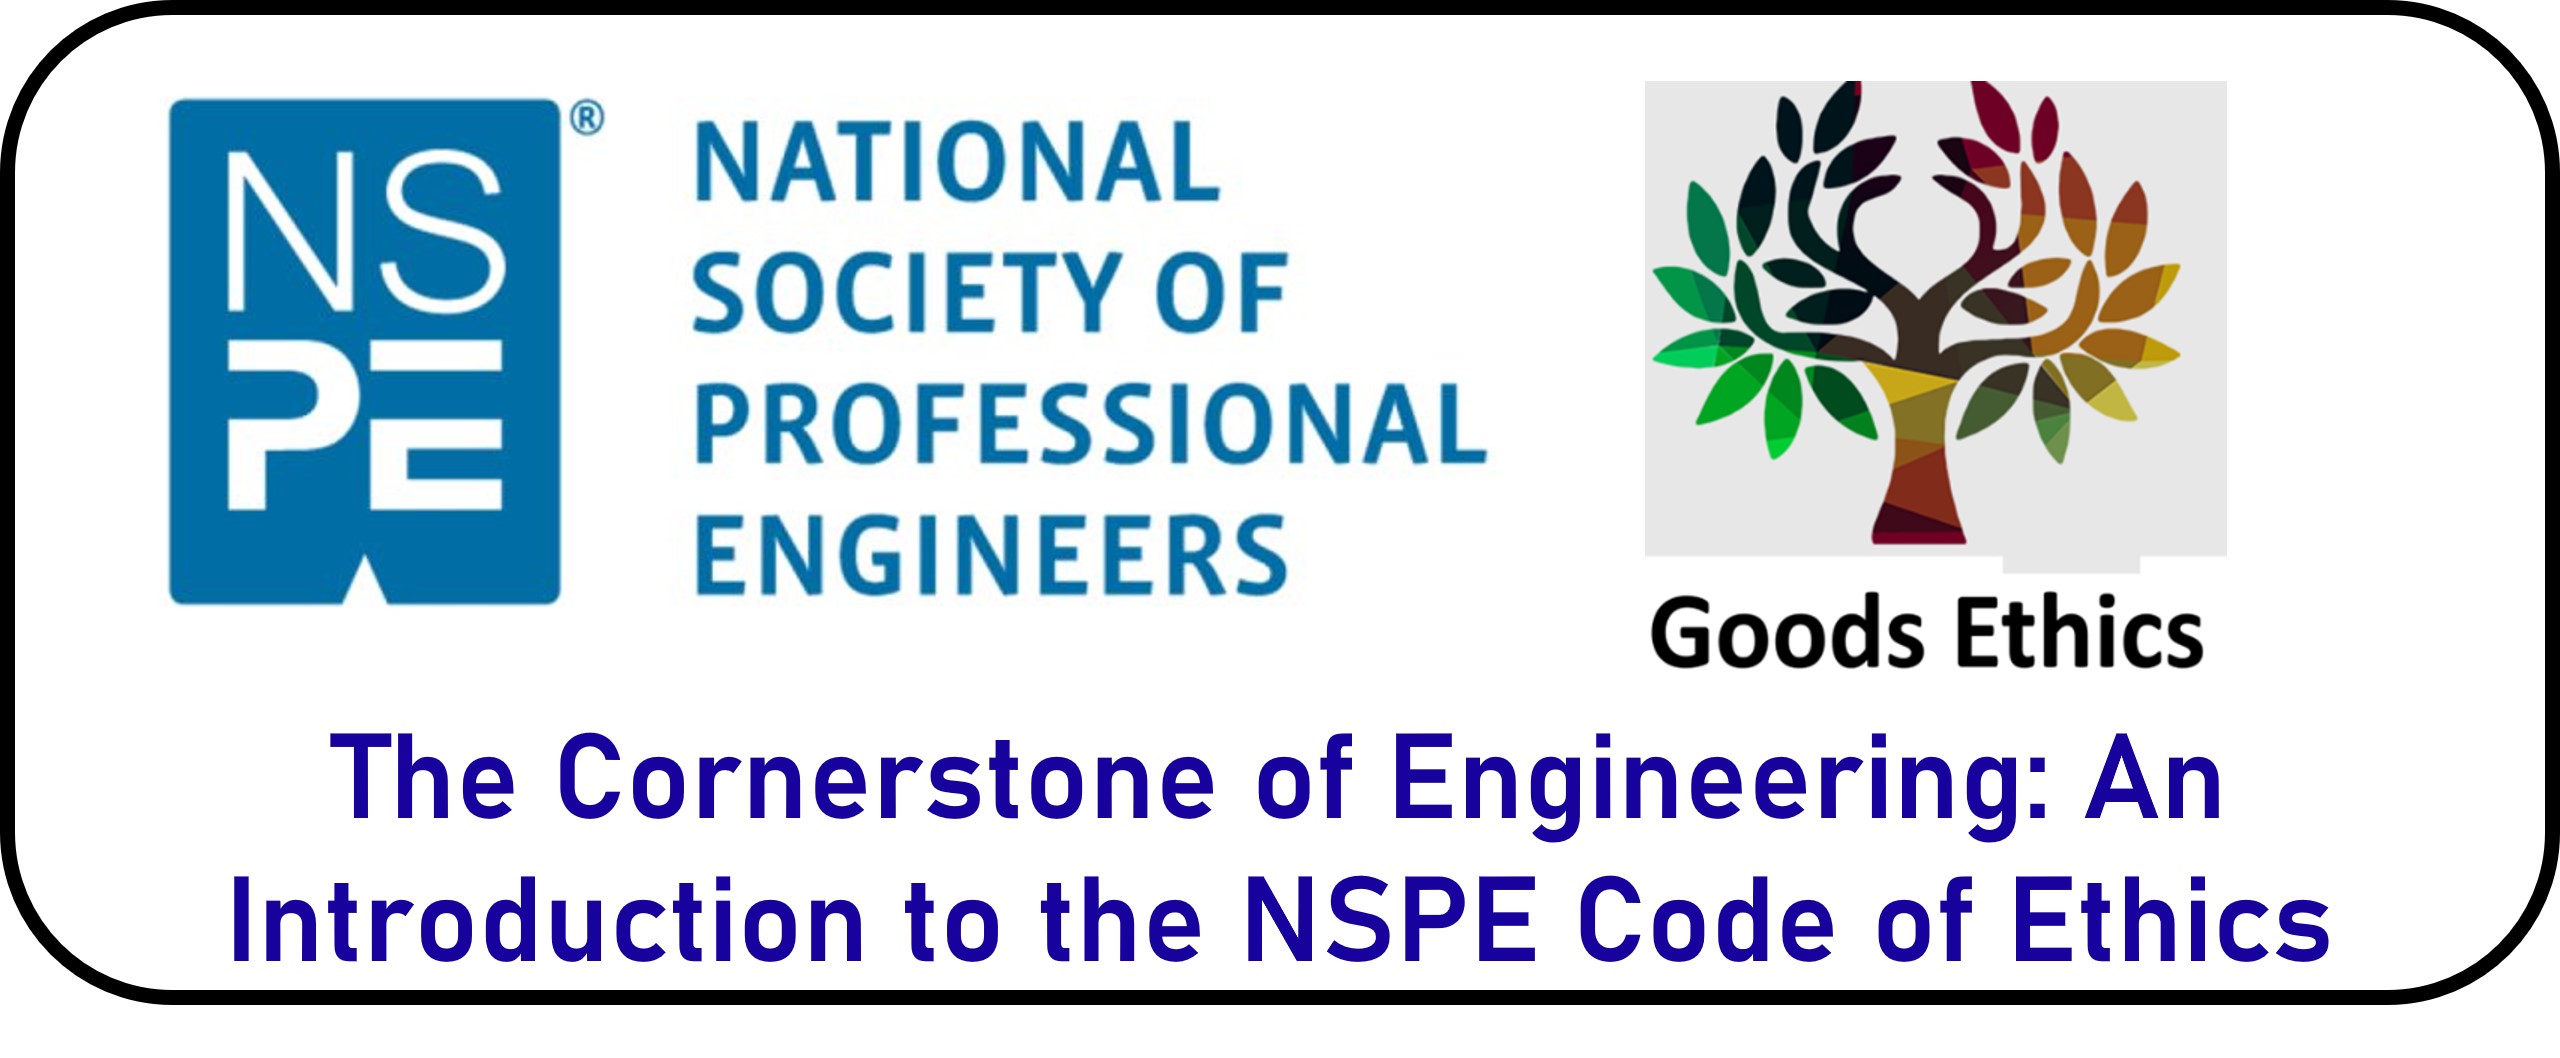 The Cornerstone of Engineering An Introduction to the NSPE Code of Ethics